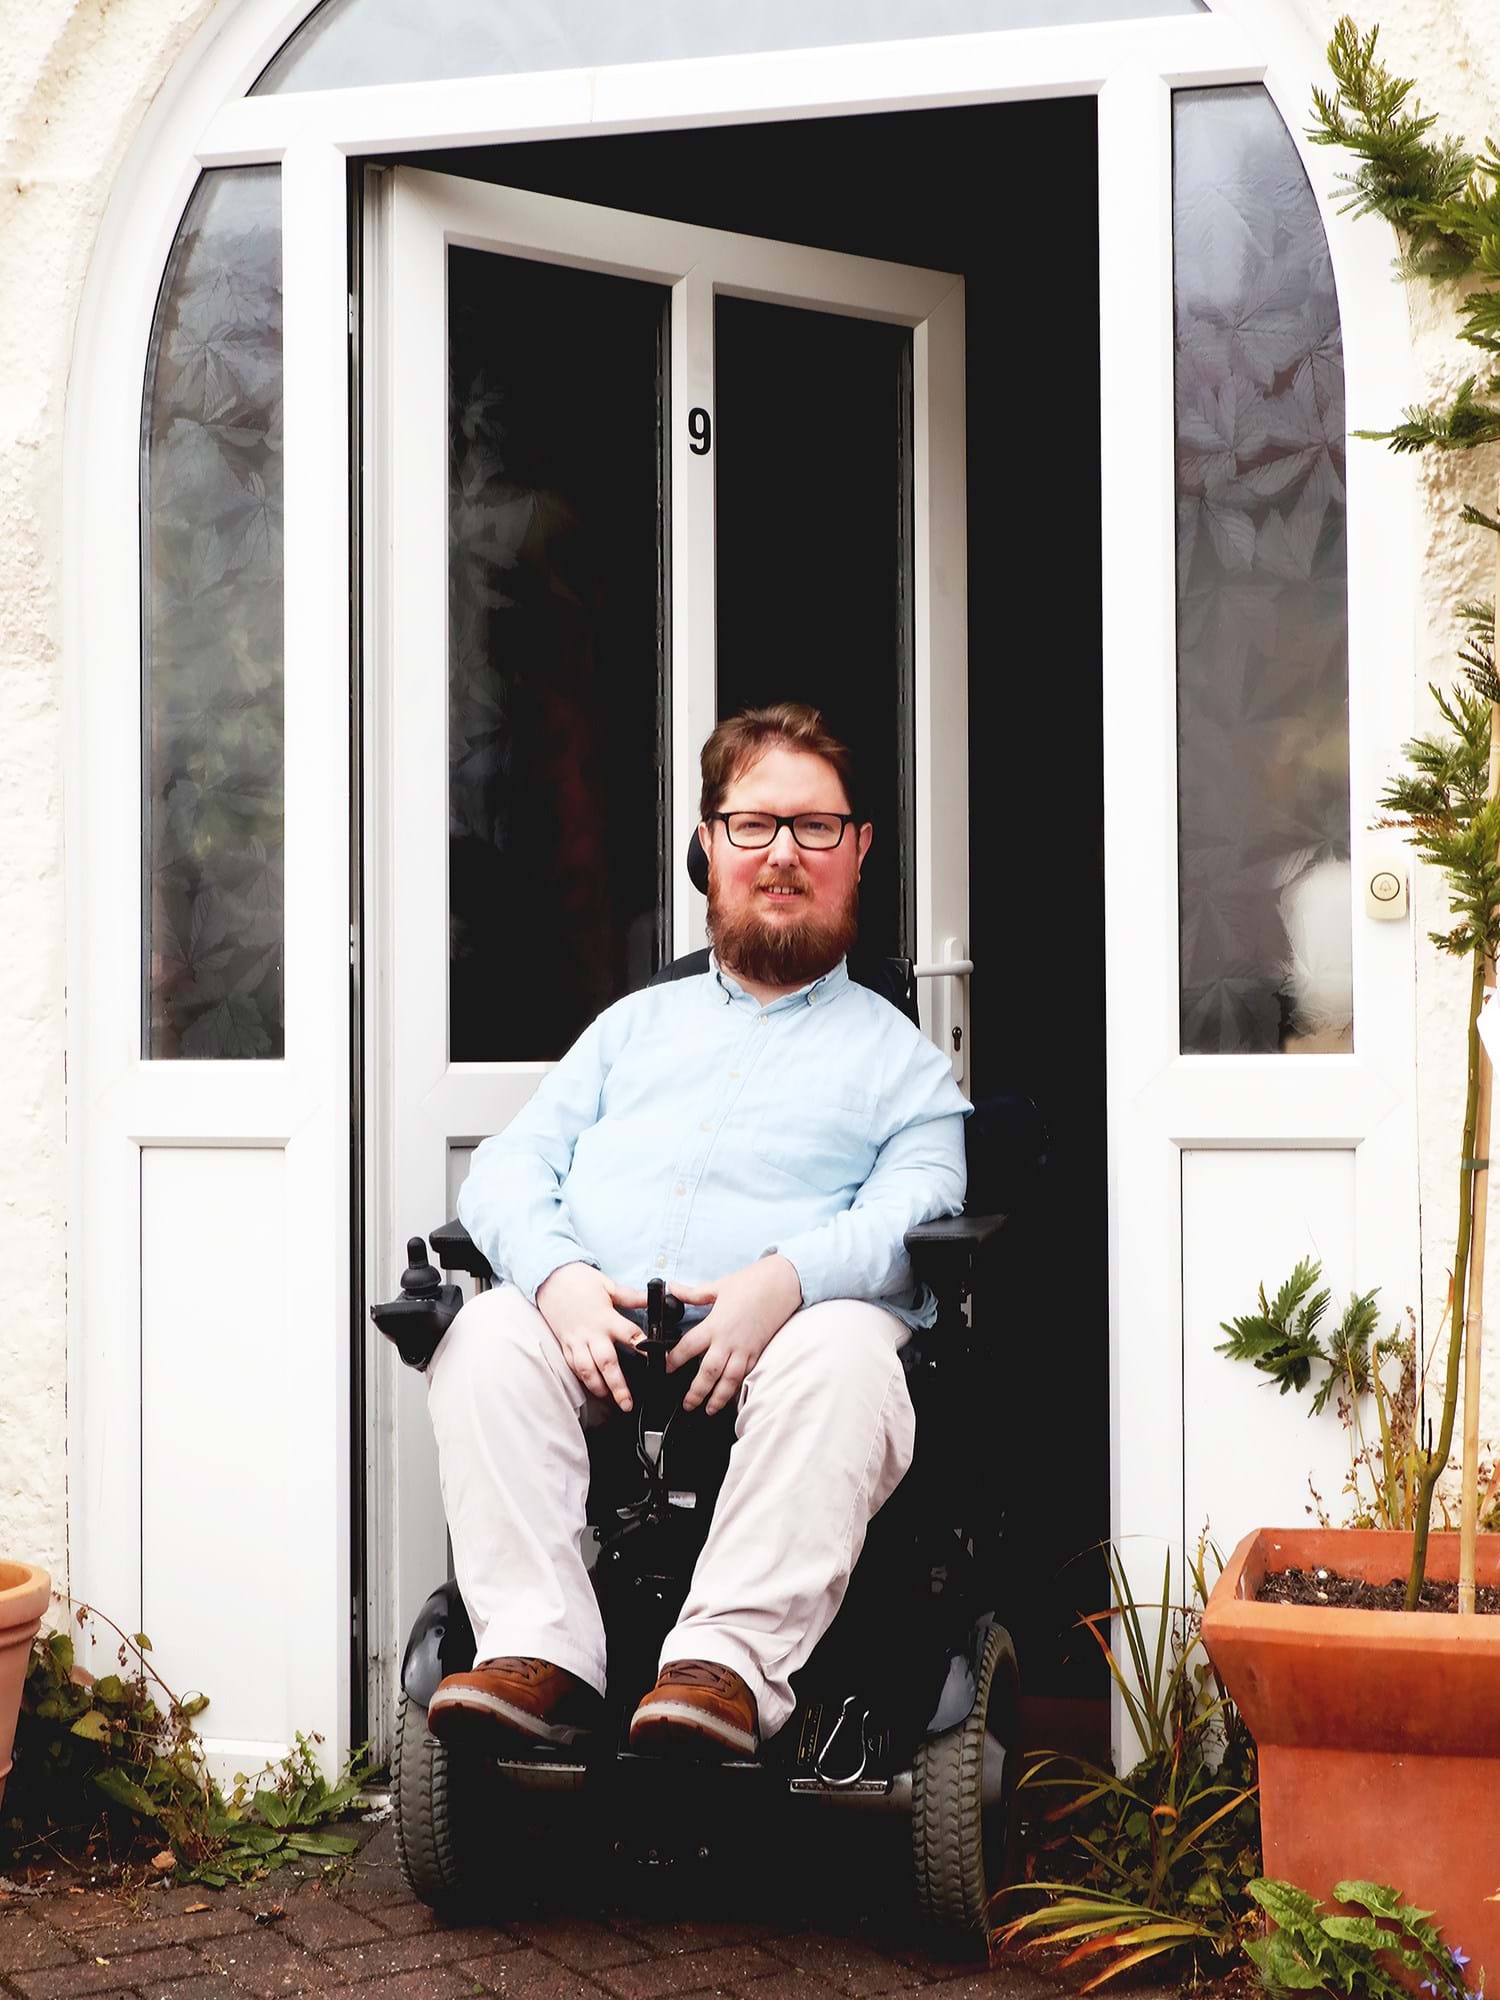 Photograph of a person in a wheelchair smiling outside a porch door